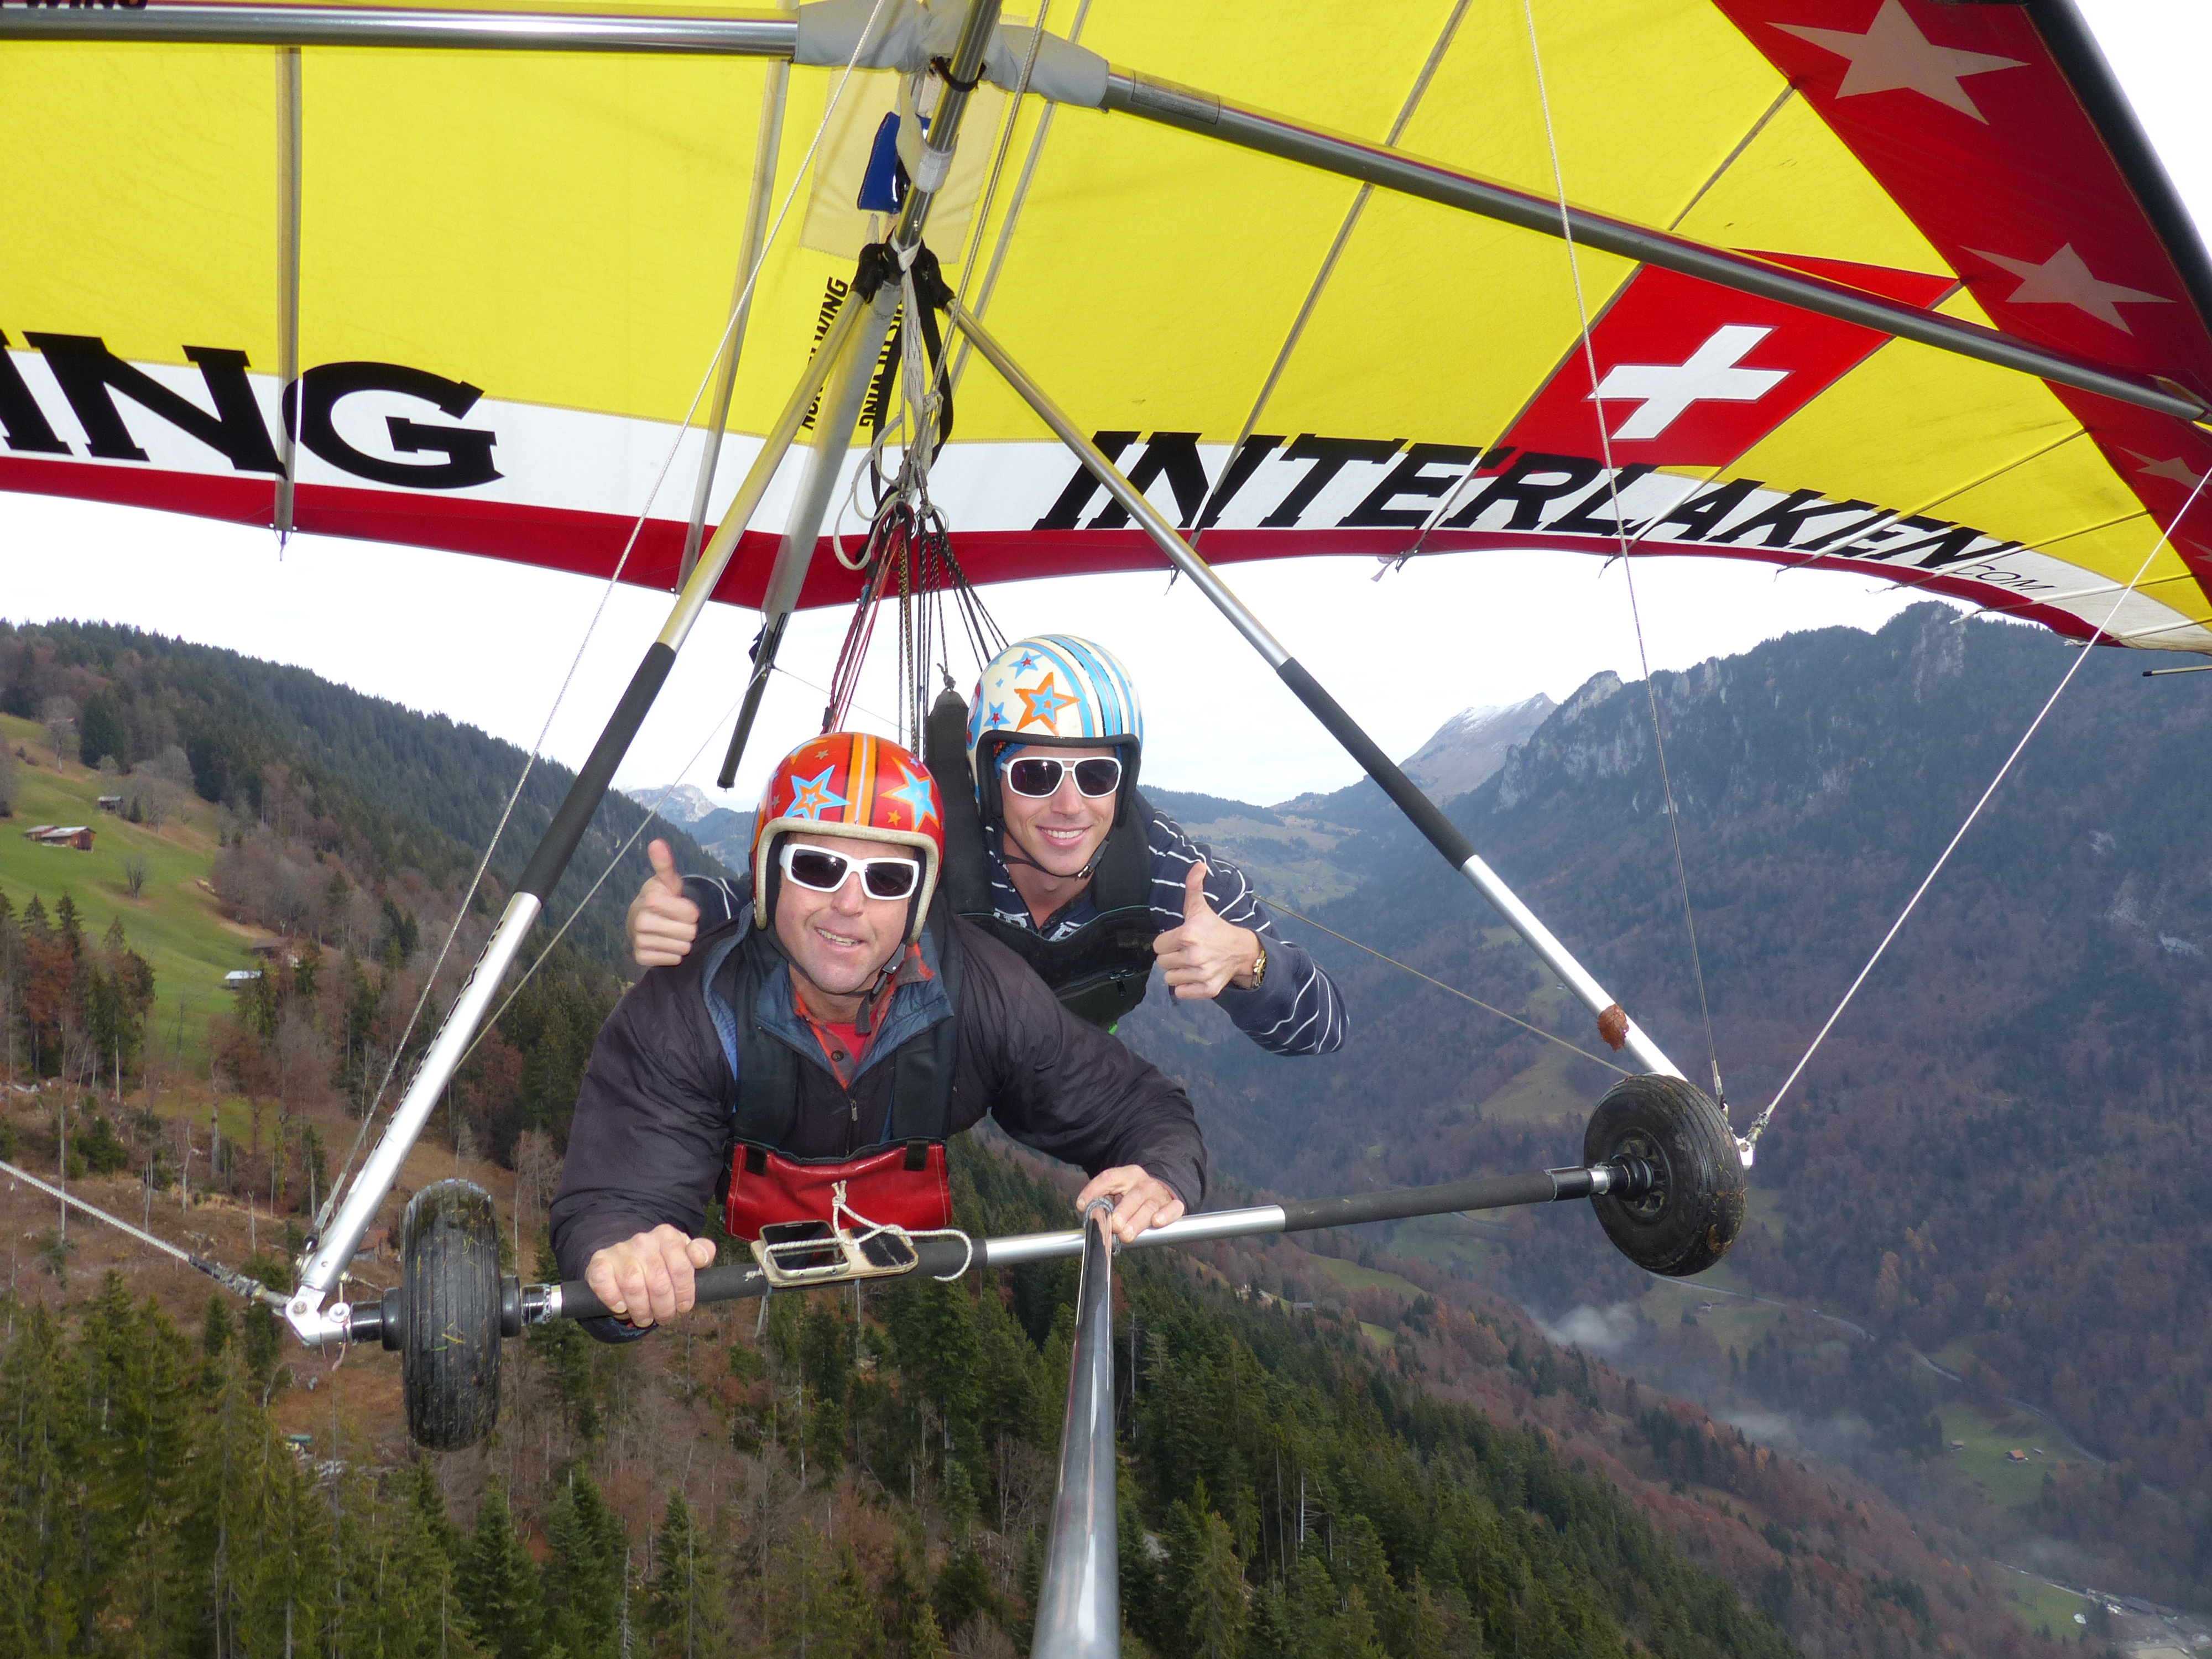 Hang Gliding in the Swiss Alps – My Final Frontier